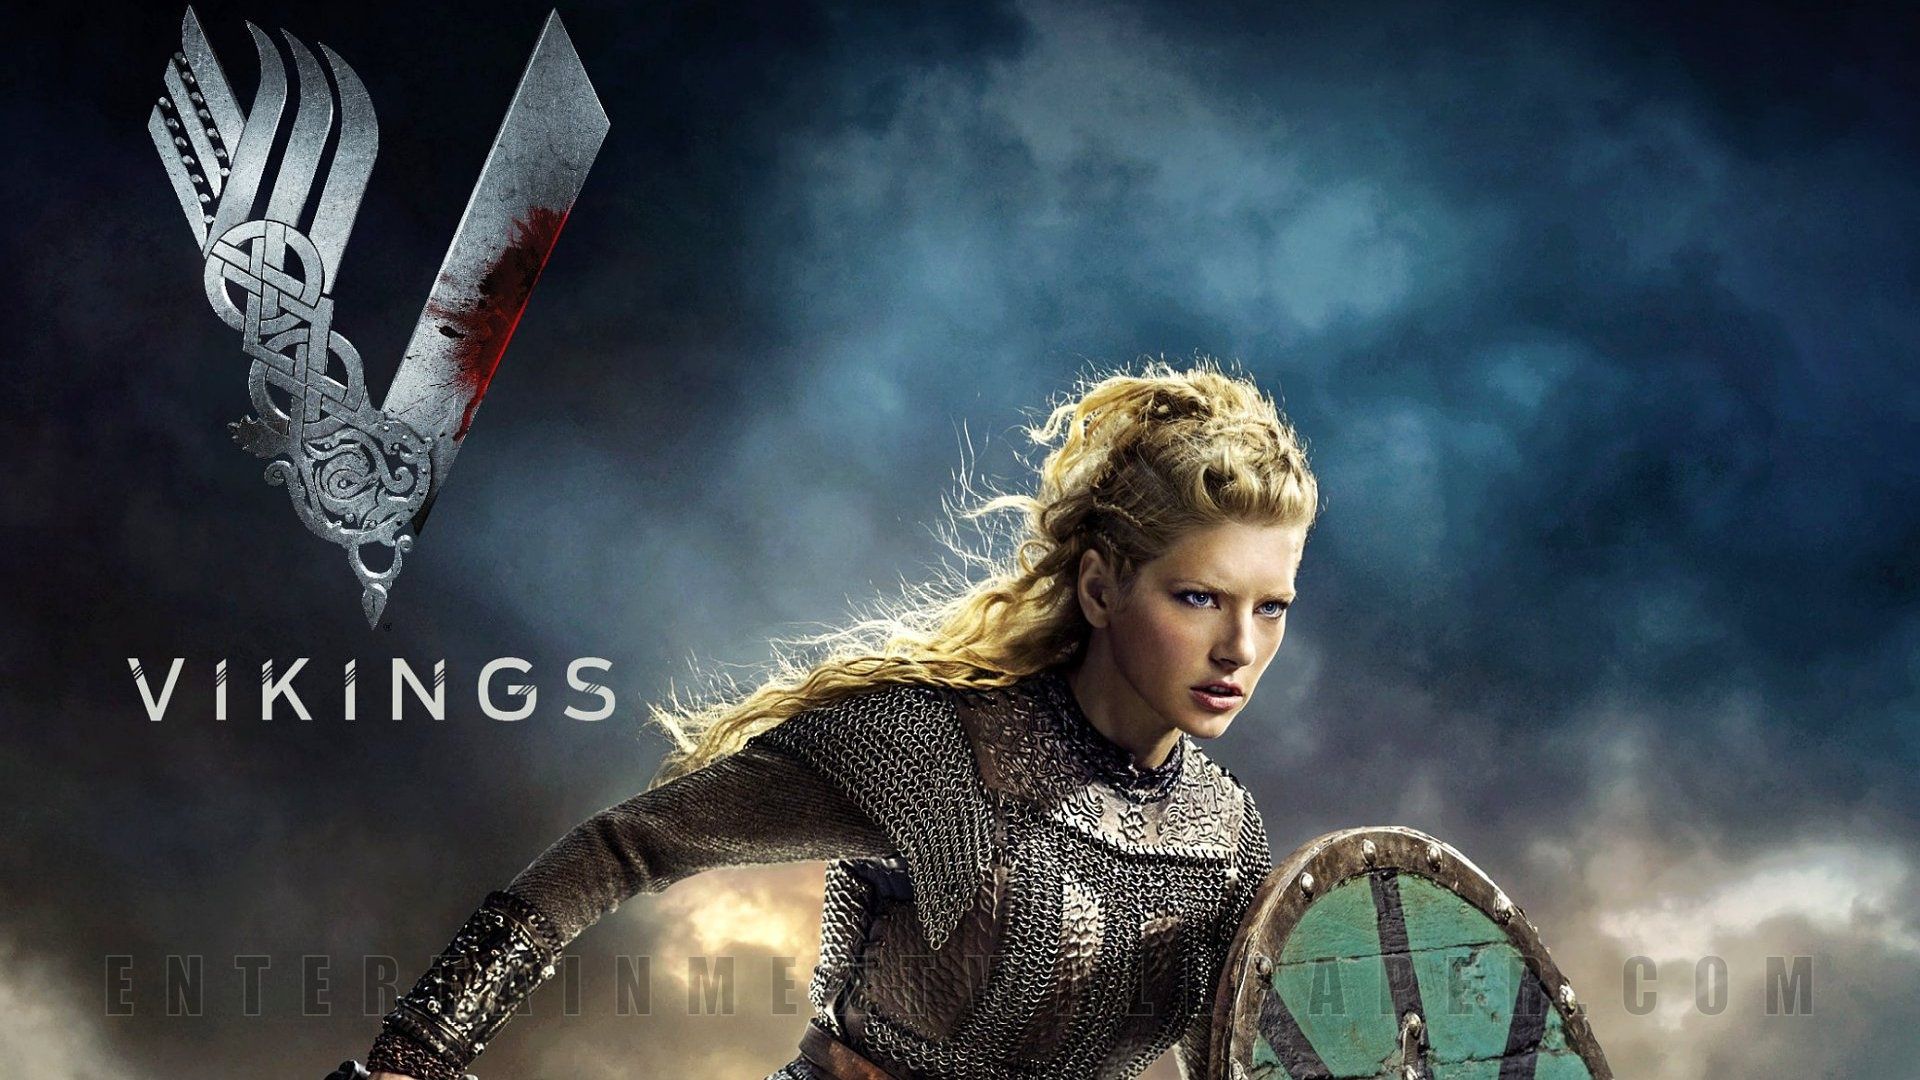 The Viking girl warrior wallpaper and image, picture, photo